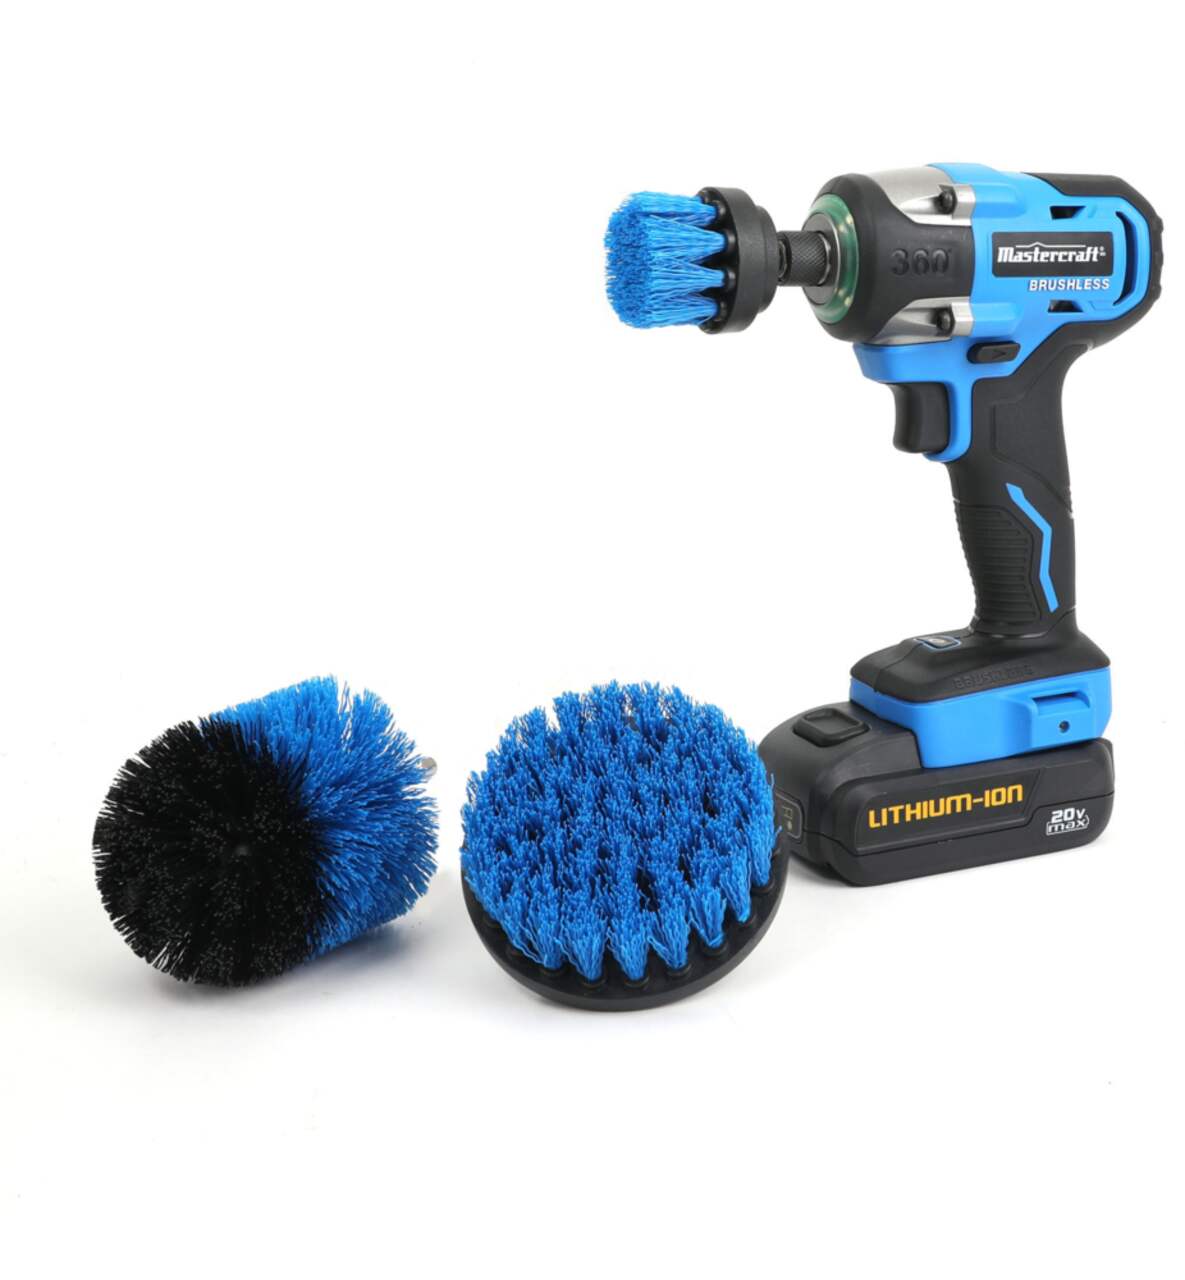 Brushes - Accessories for mini drill - Power tools accesories